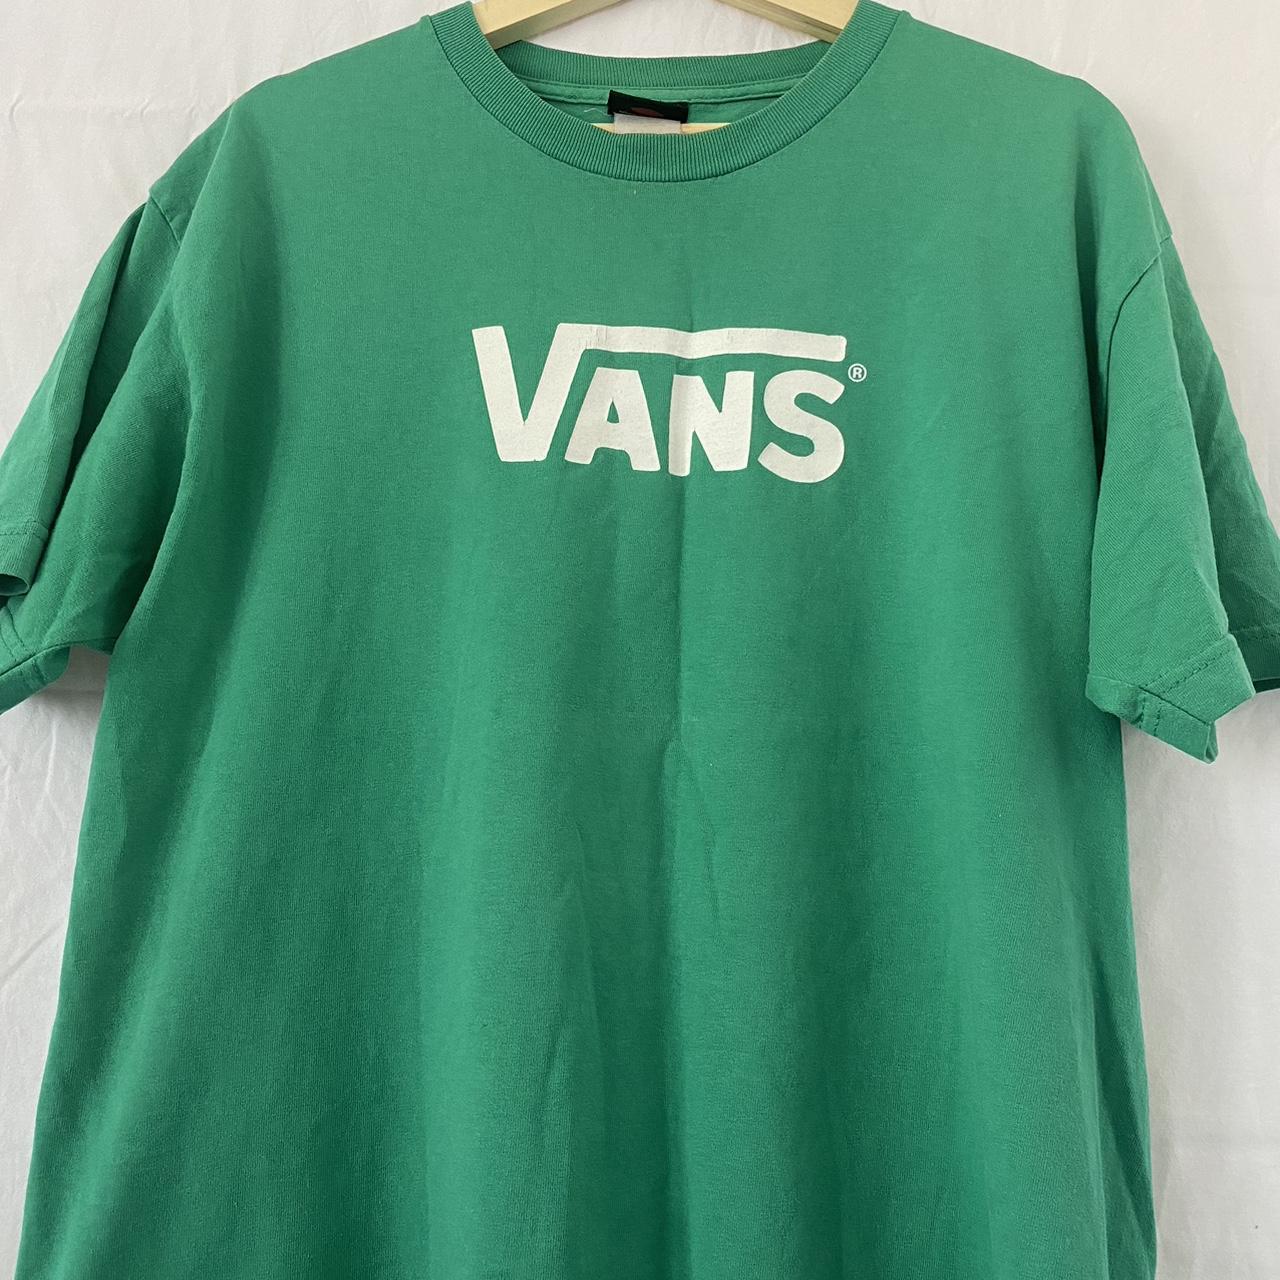 💚💚💚Selling this bright green vans oversized t-shirt.... - Depop